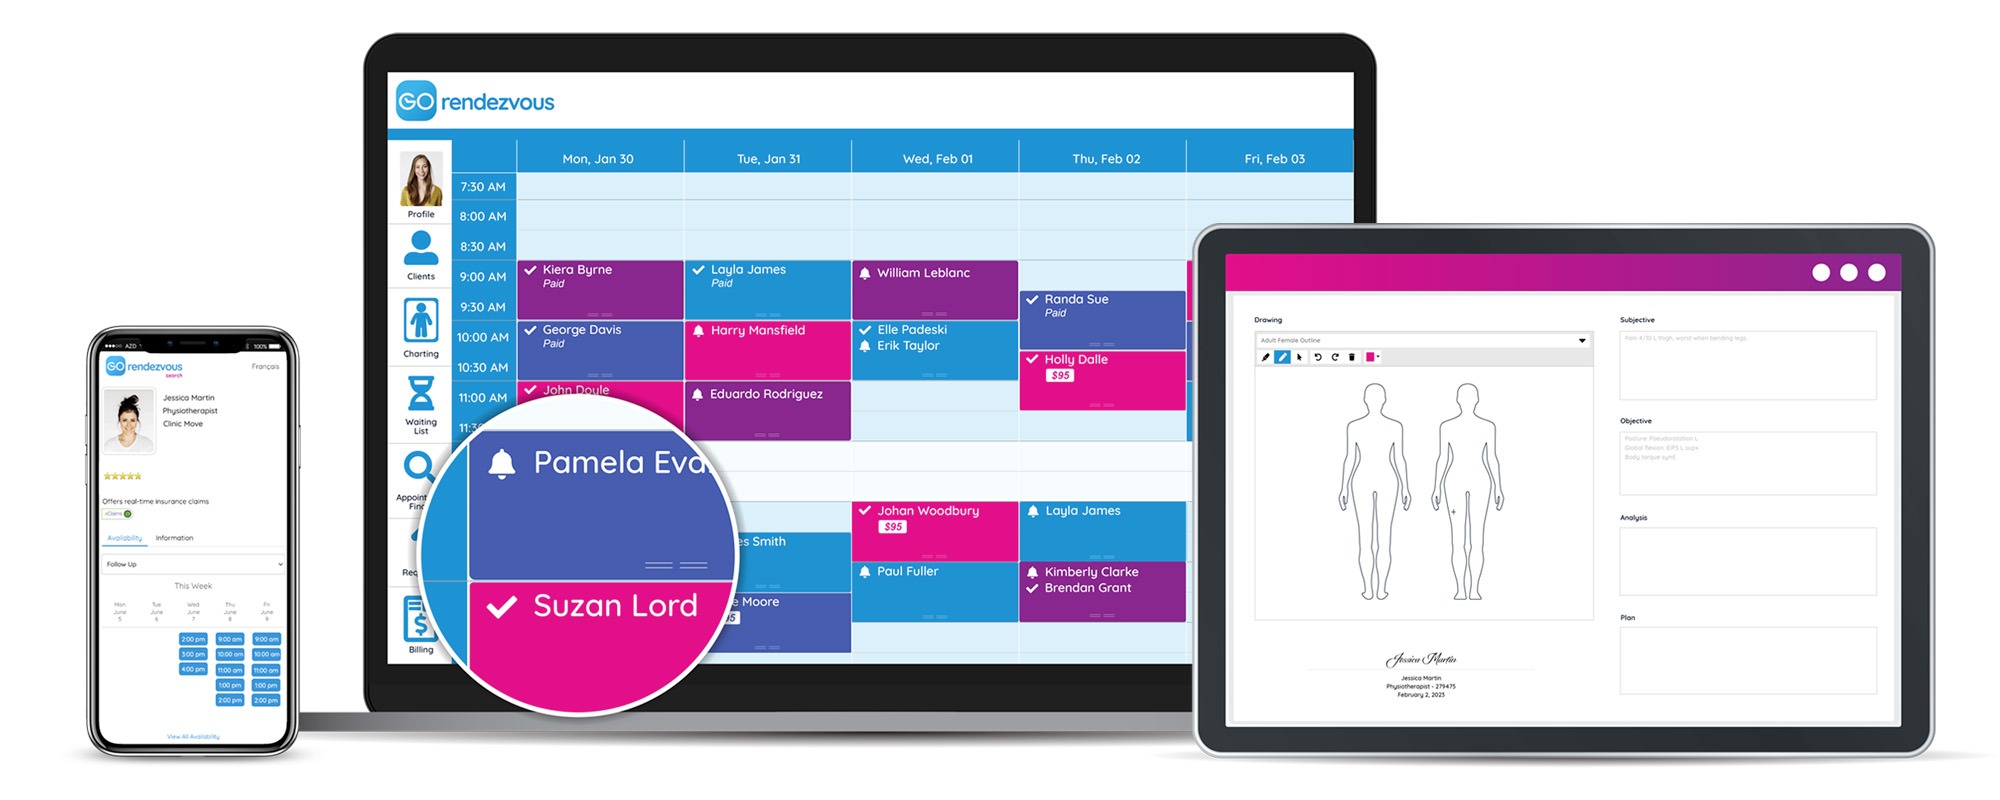 A view of a reflexology therapist's GOrendezvous schedule on different devices